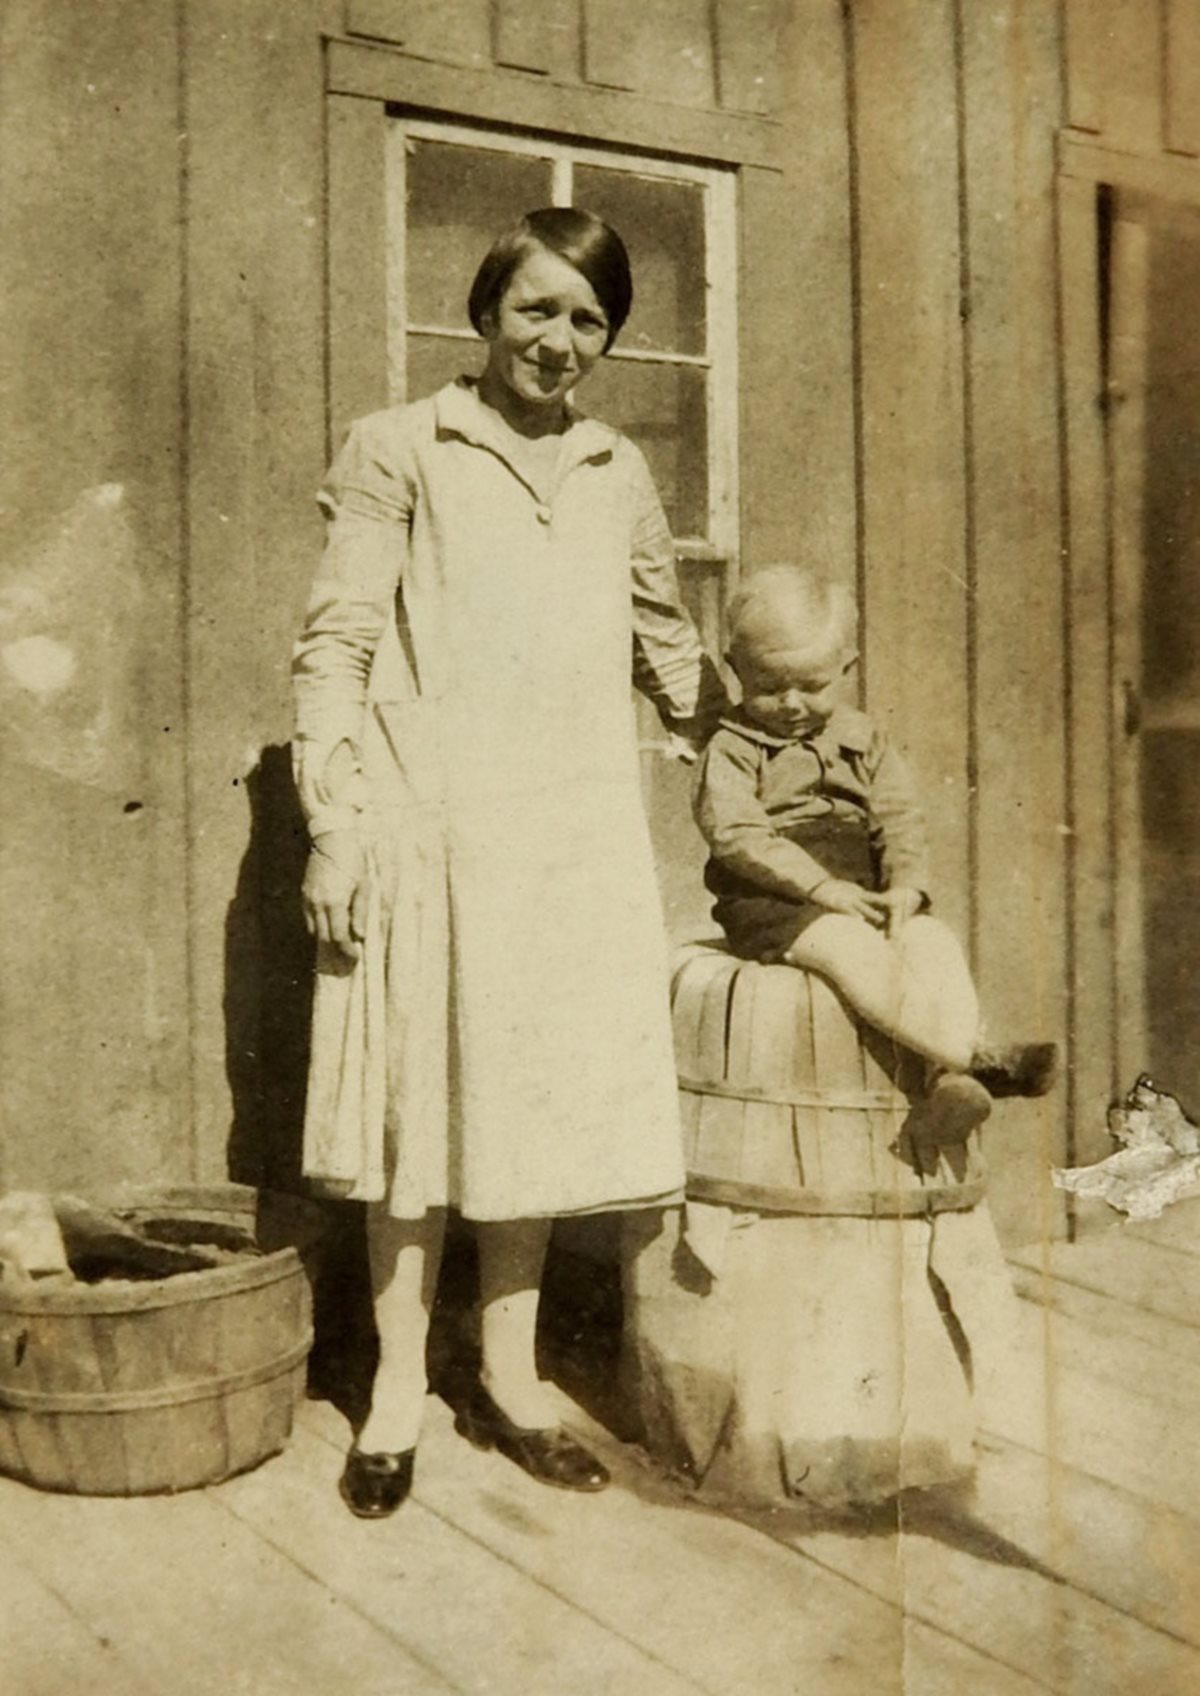 Woman and Little Boy in Best, Texas in 1920s